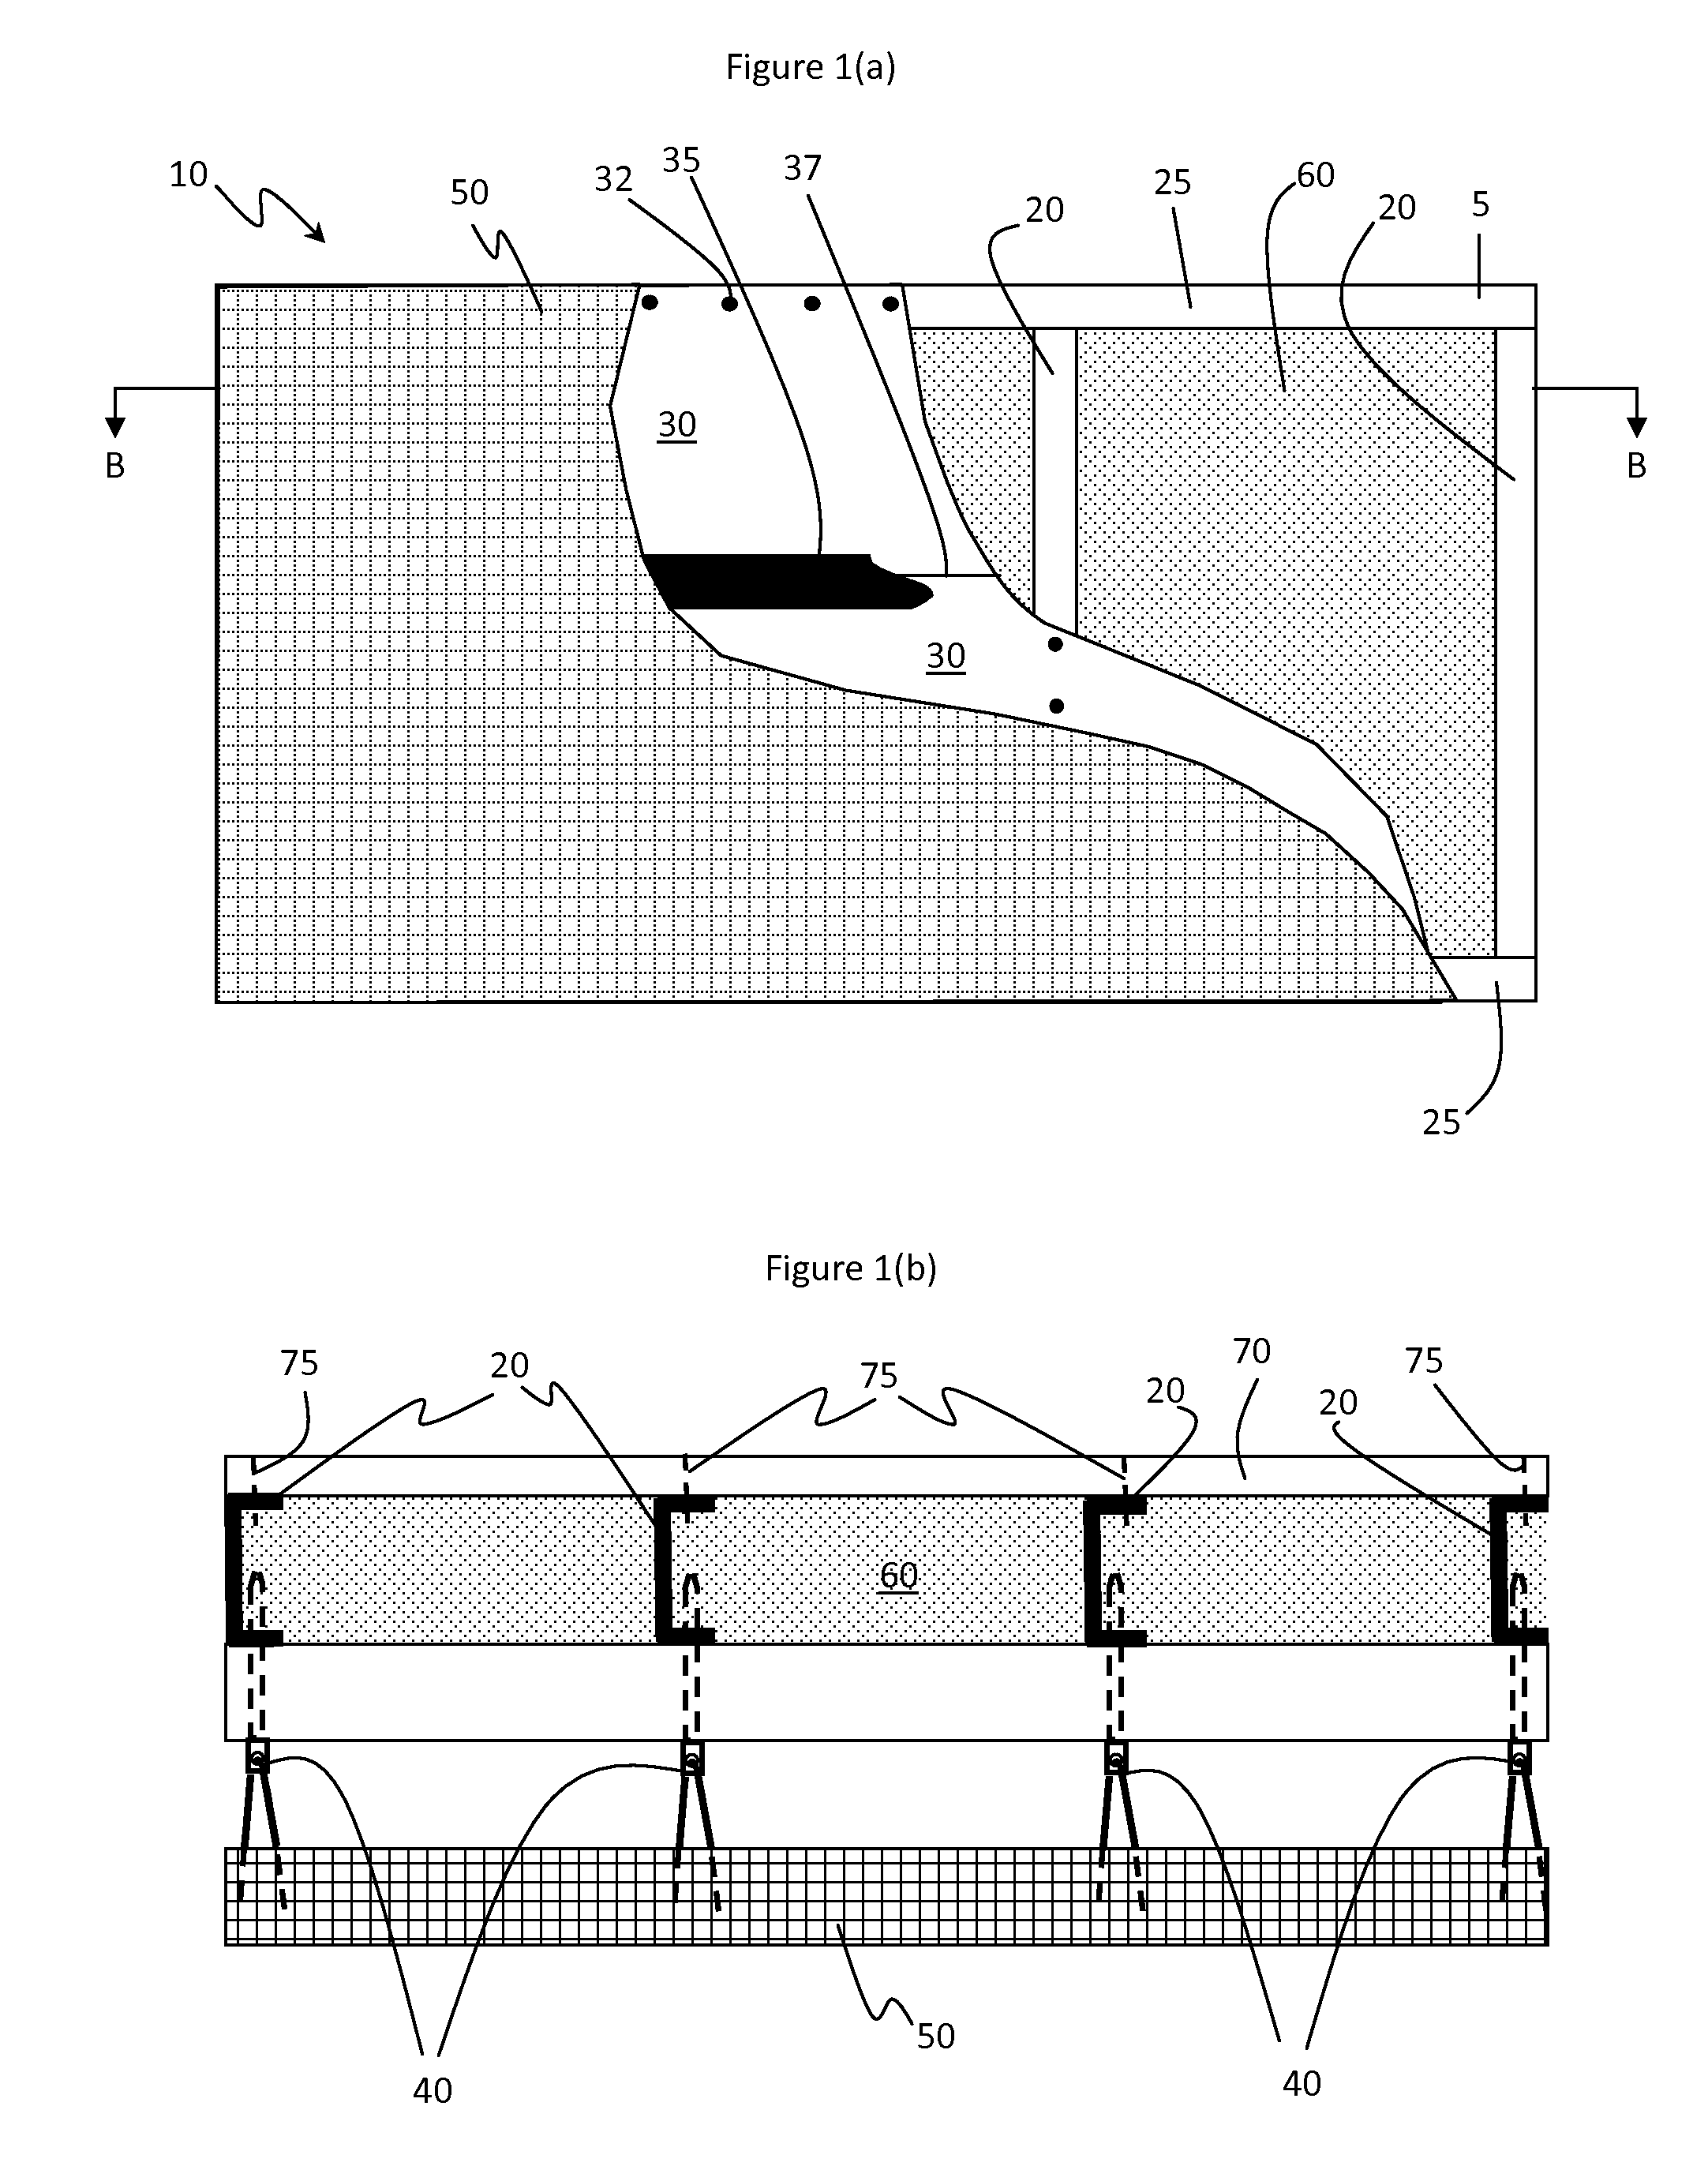 Continuously insulated wall assembly